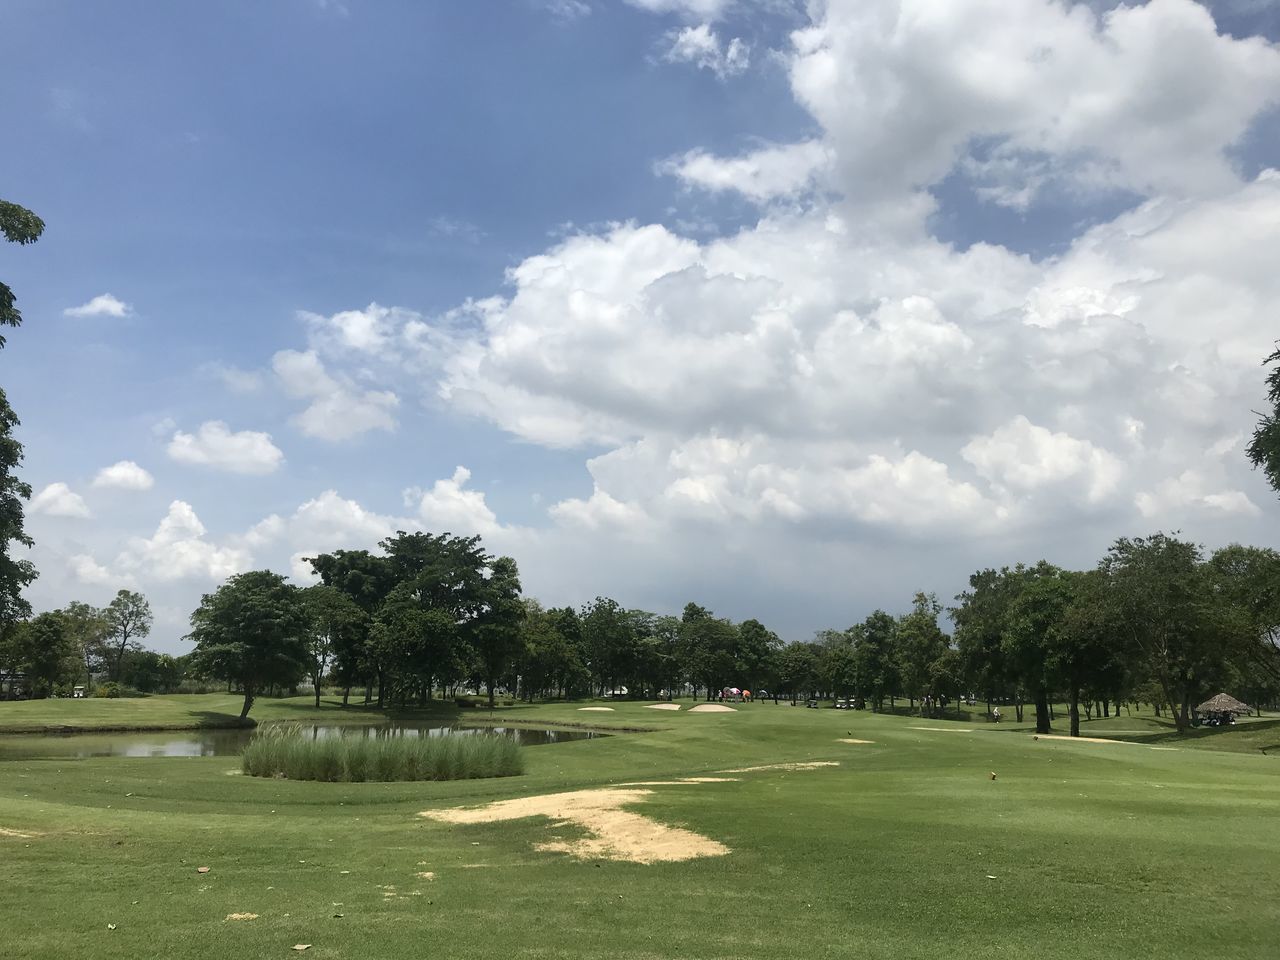 VIEW OF GOLF COURSE AGAINST CLOUDY SKY